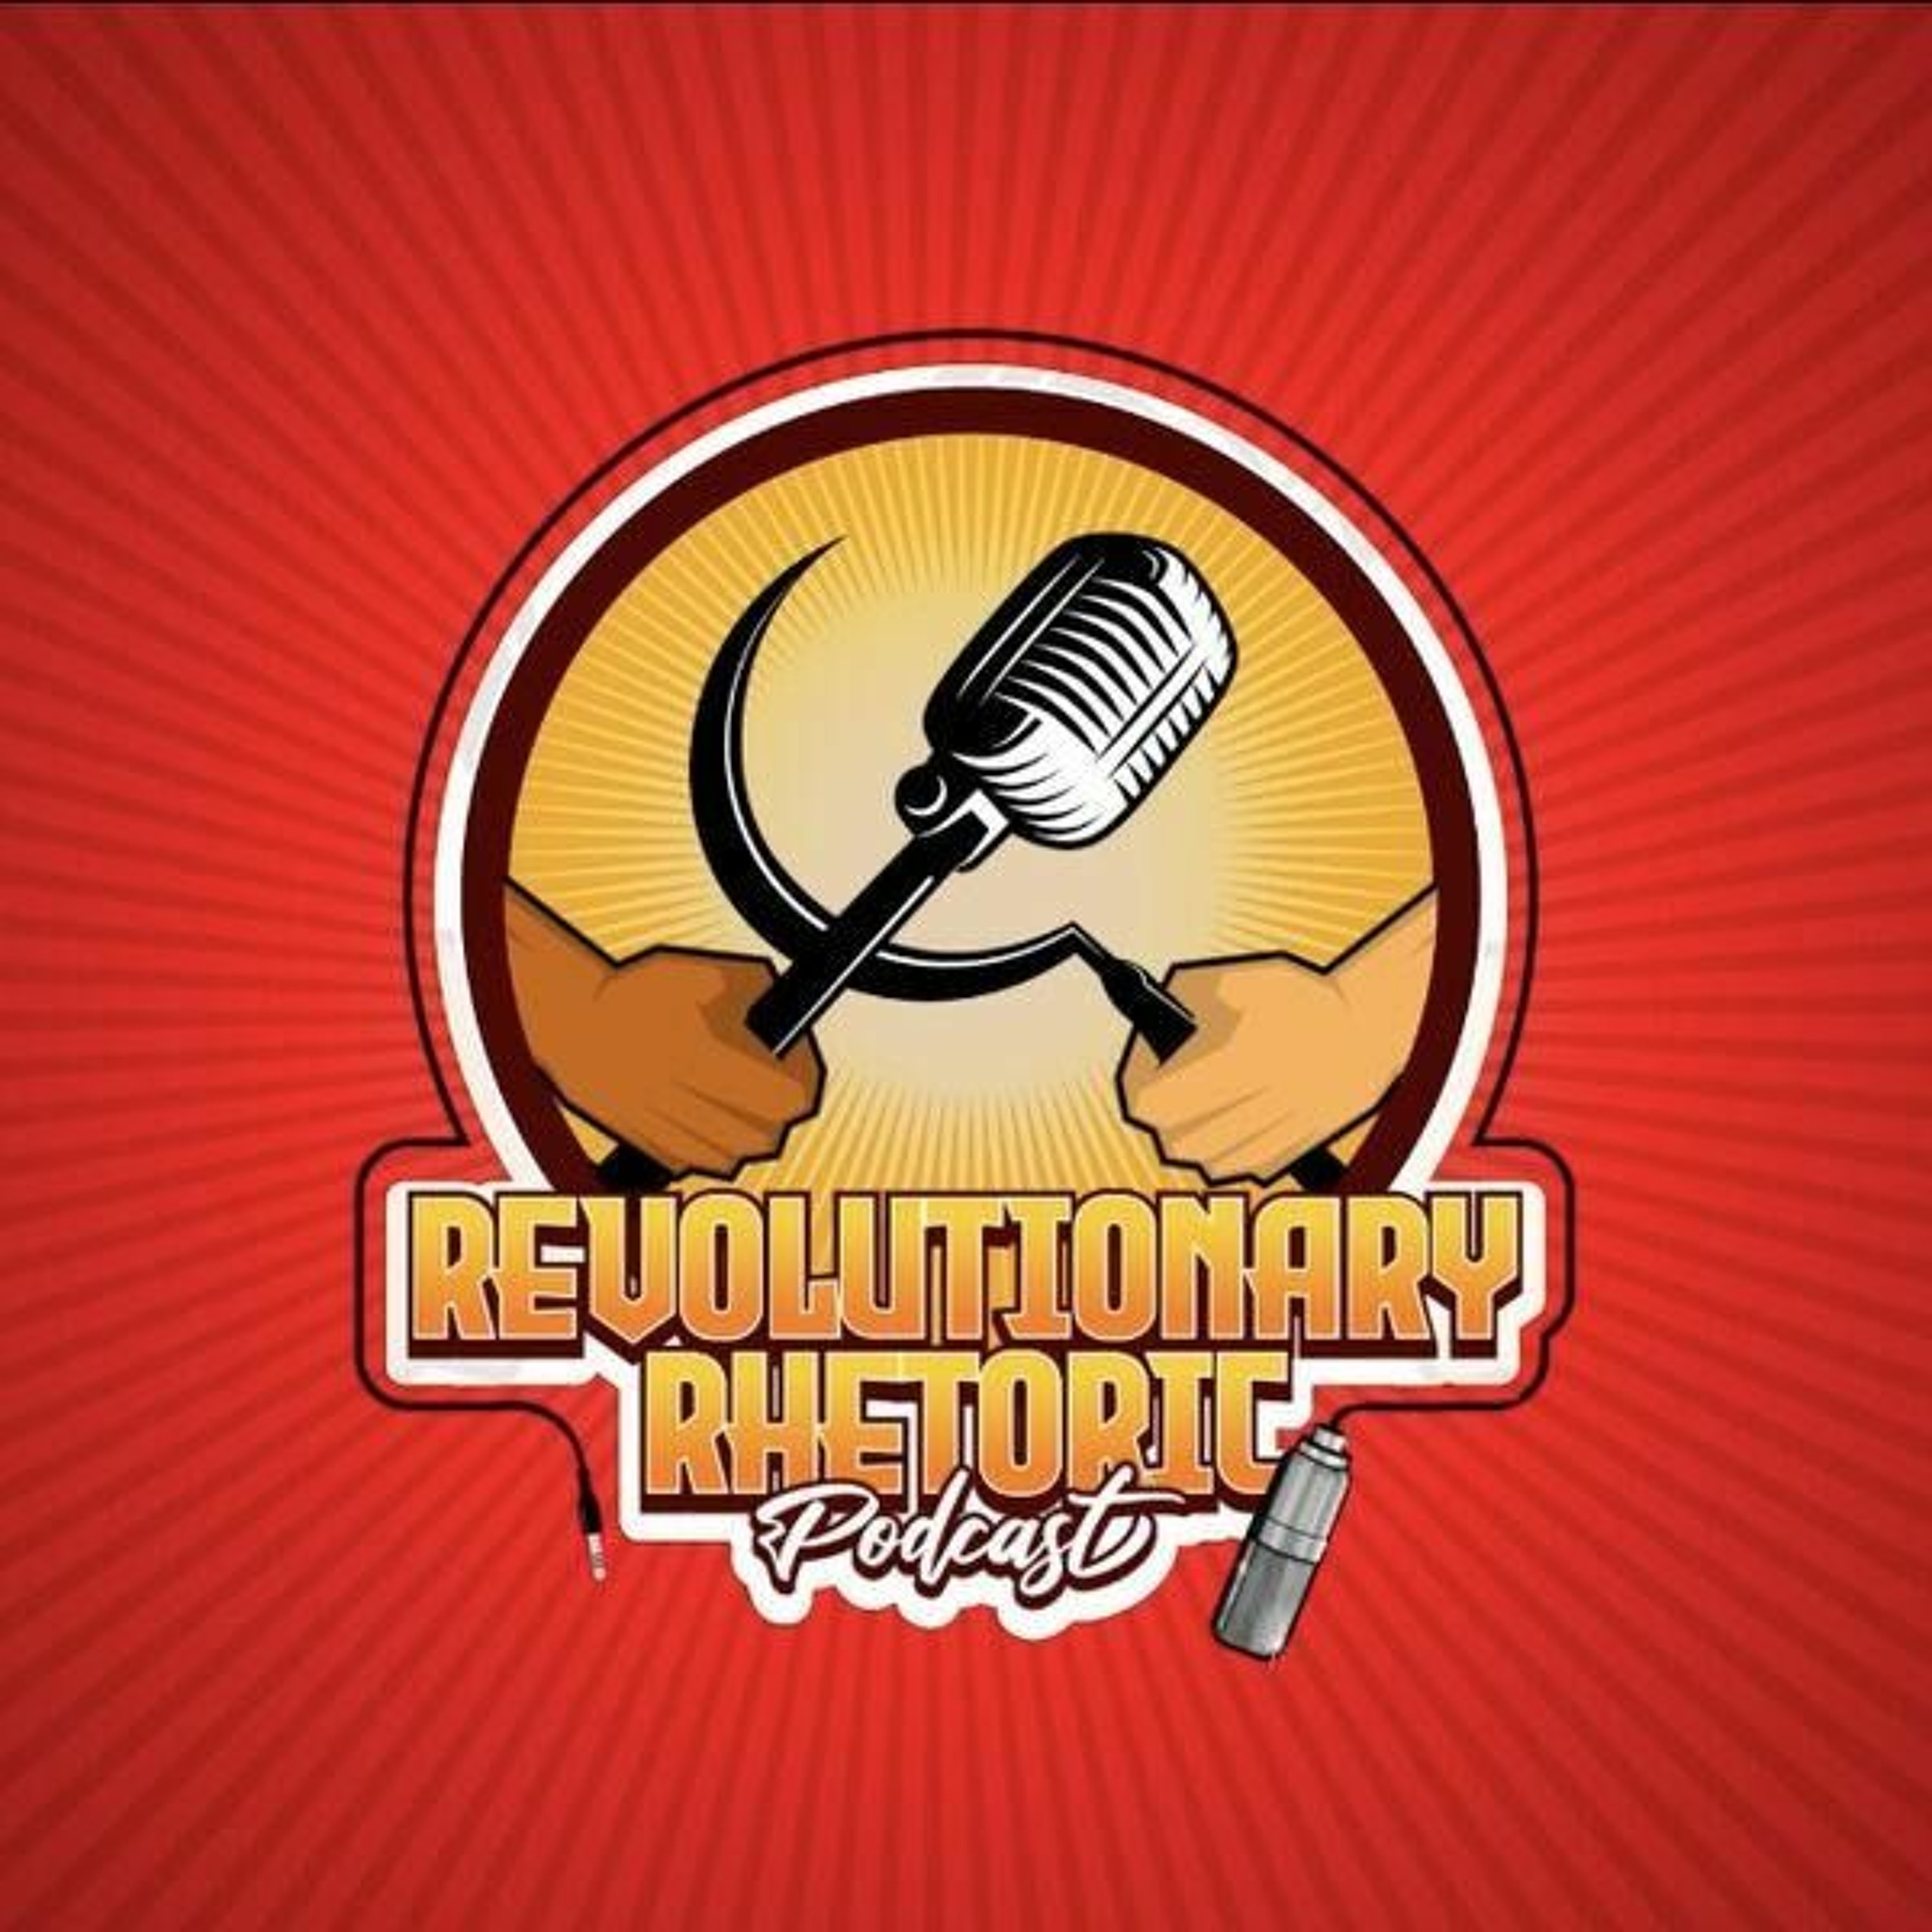 Collab with Revolutionary Rhetoric - Episode 18: An Interview with Turn Leftist!